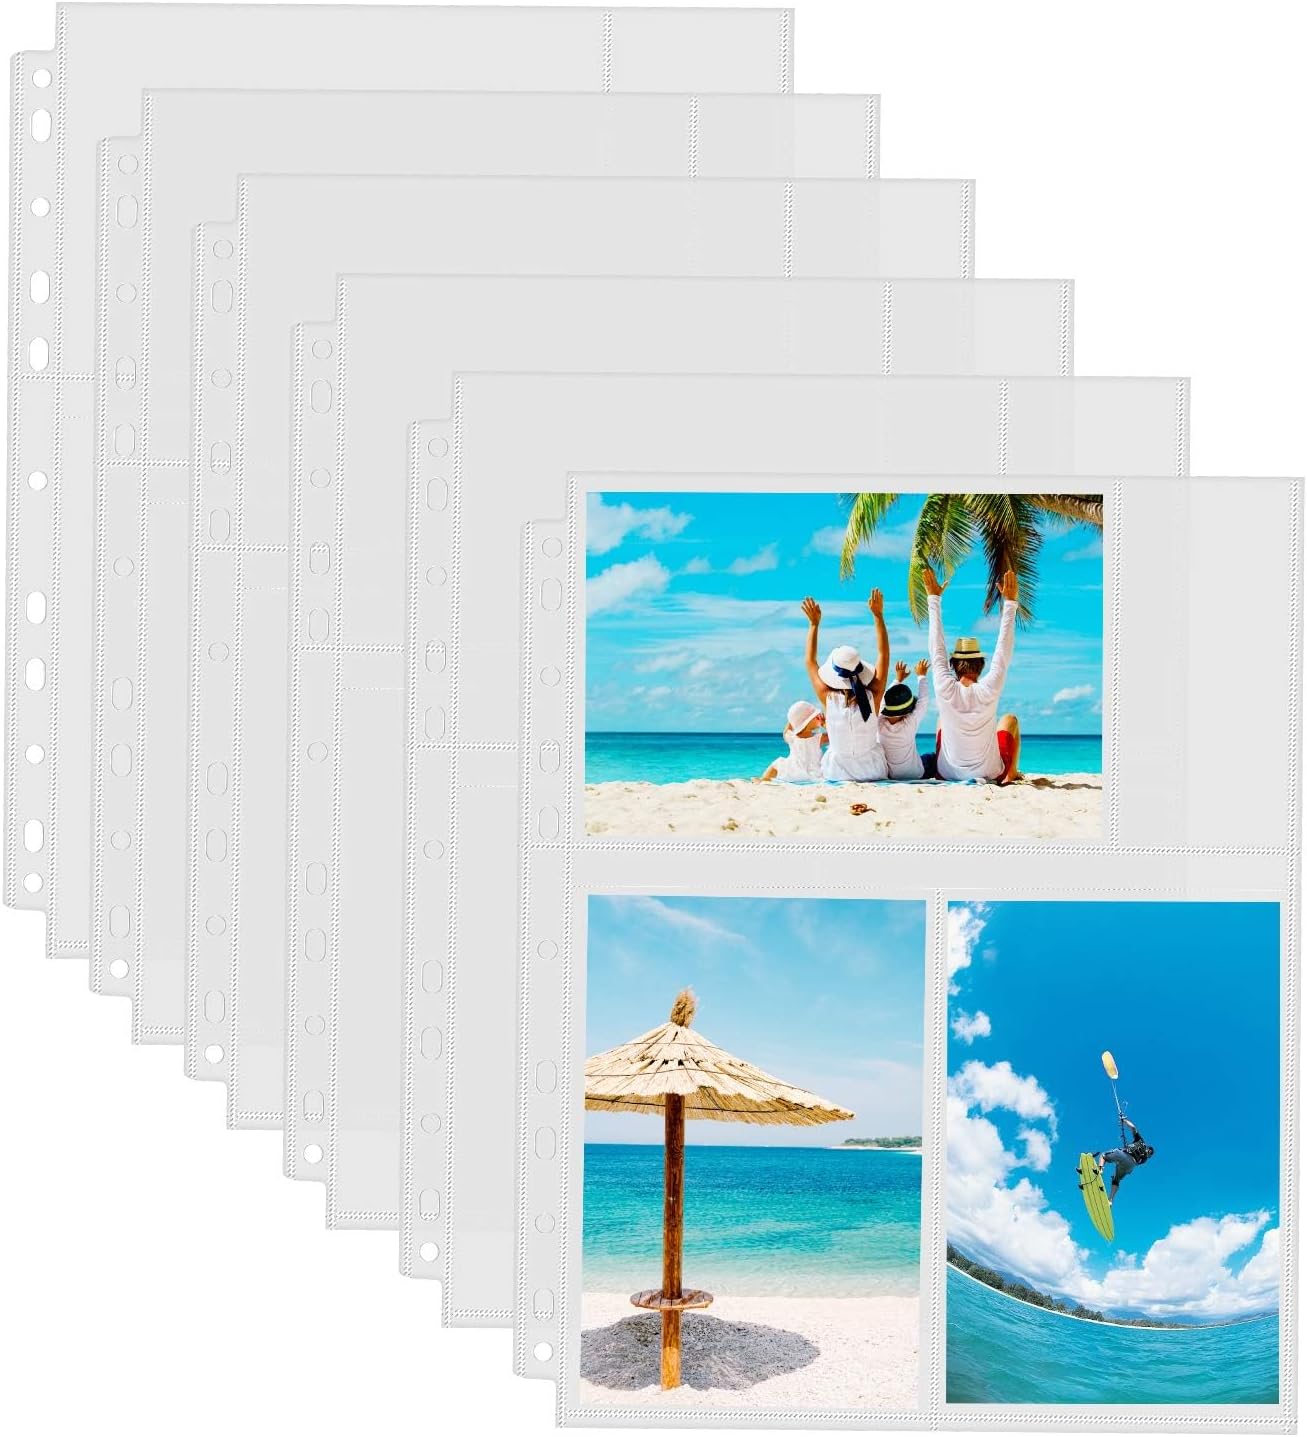 Sooez 30 Pack Heavy Duty Photo Page Protector (4x6, Display 180 Photos), Plastic Clear Photo Album Sleeves for 3-Ring Binder, Three Pockets Per Page Top Loading